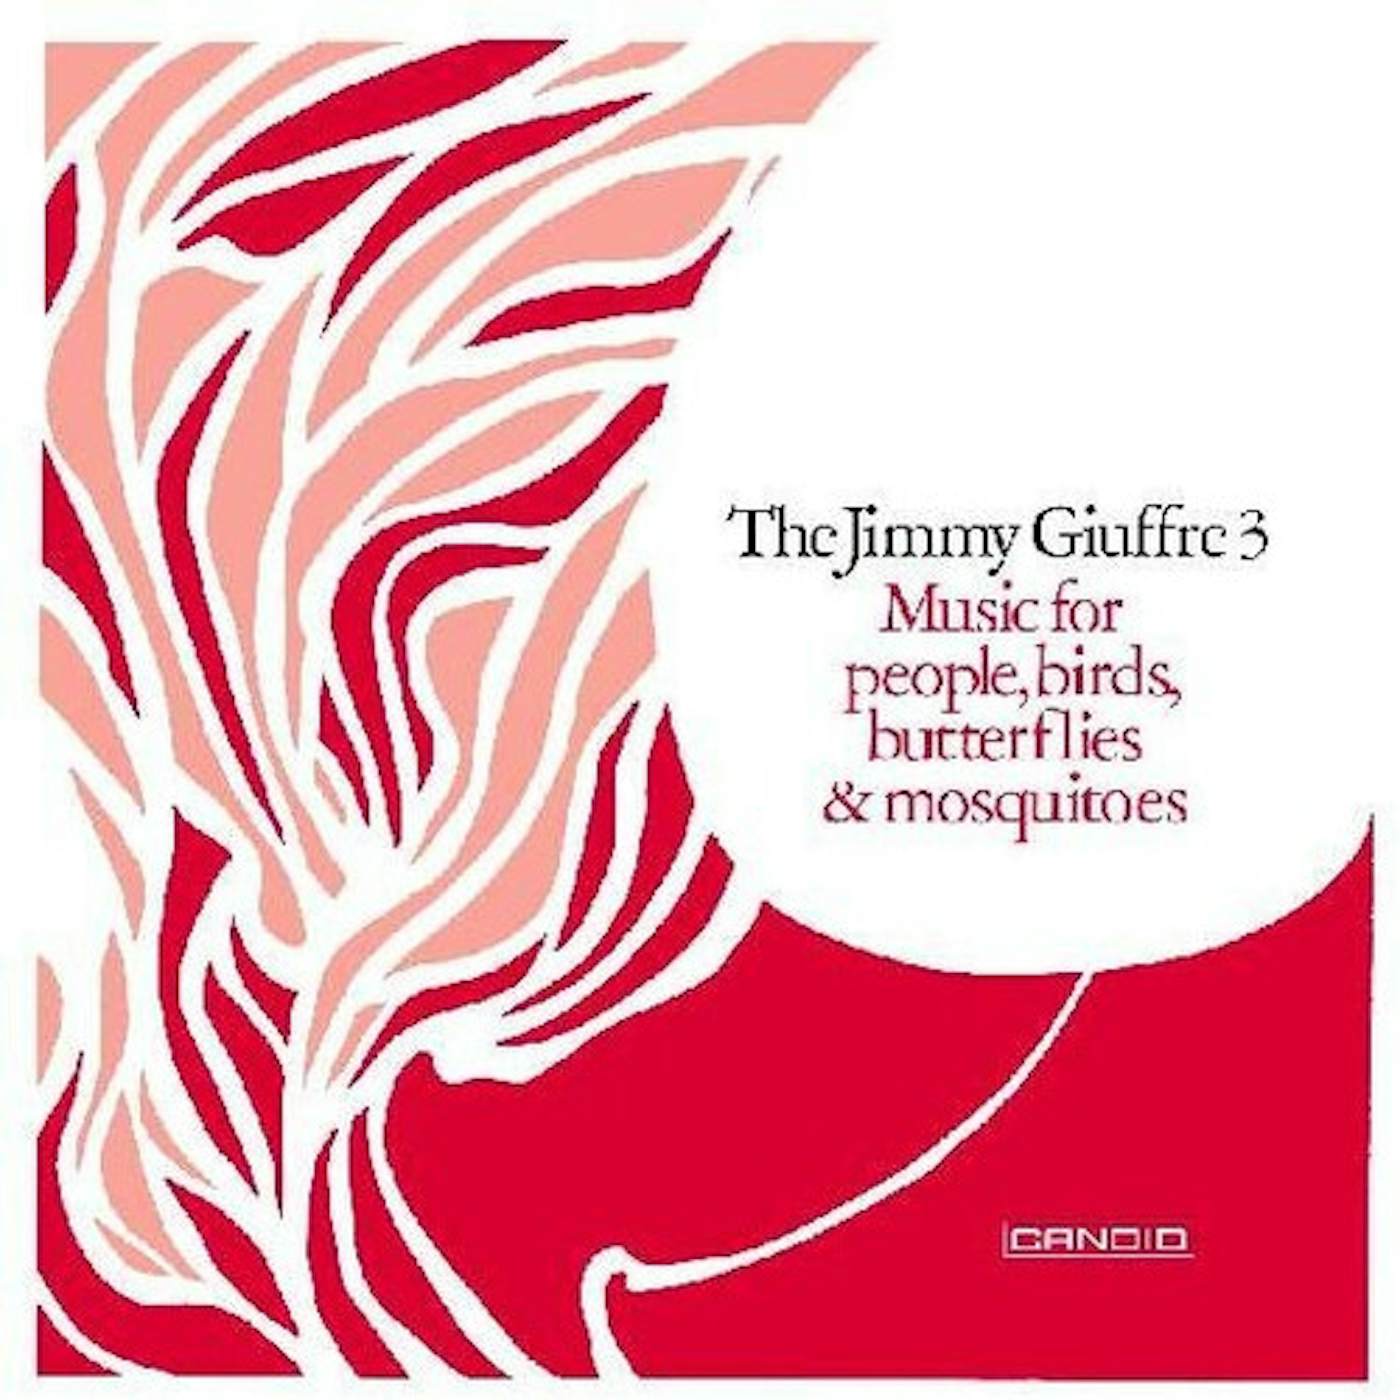 Jimmy Giuffre MUSIC FOR PEOPLE BIRDS BUTTERFLIES & MOSQUITOES Vinyl Record